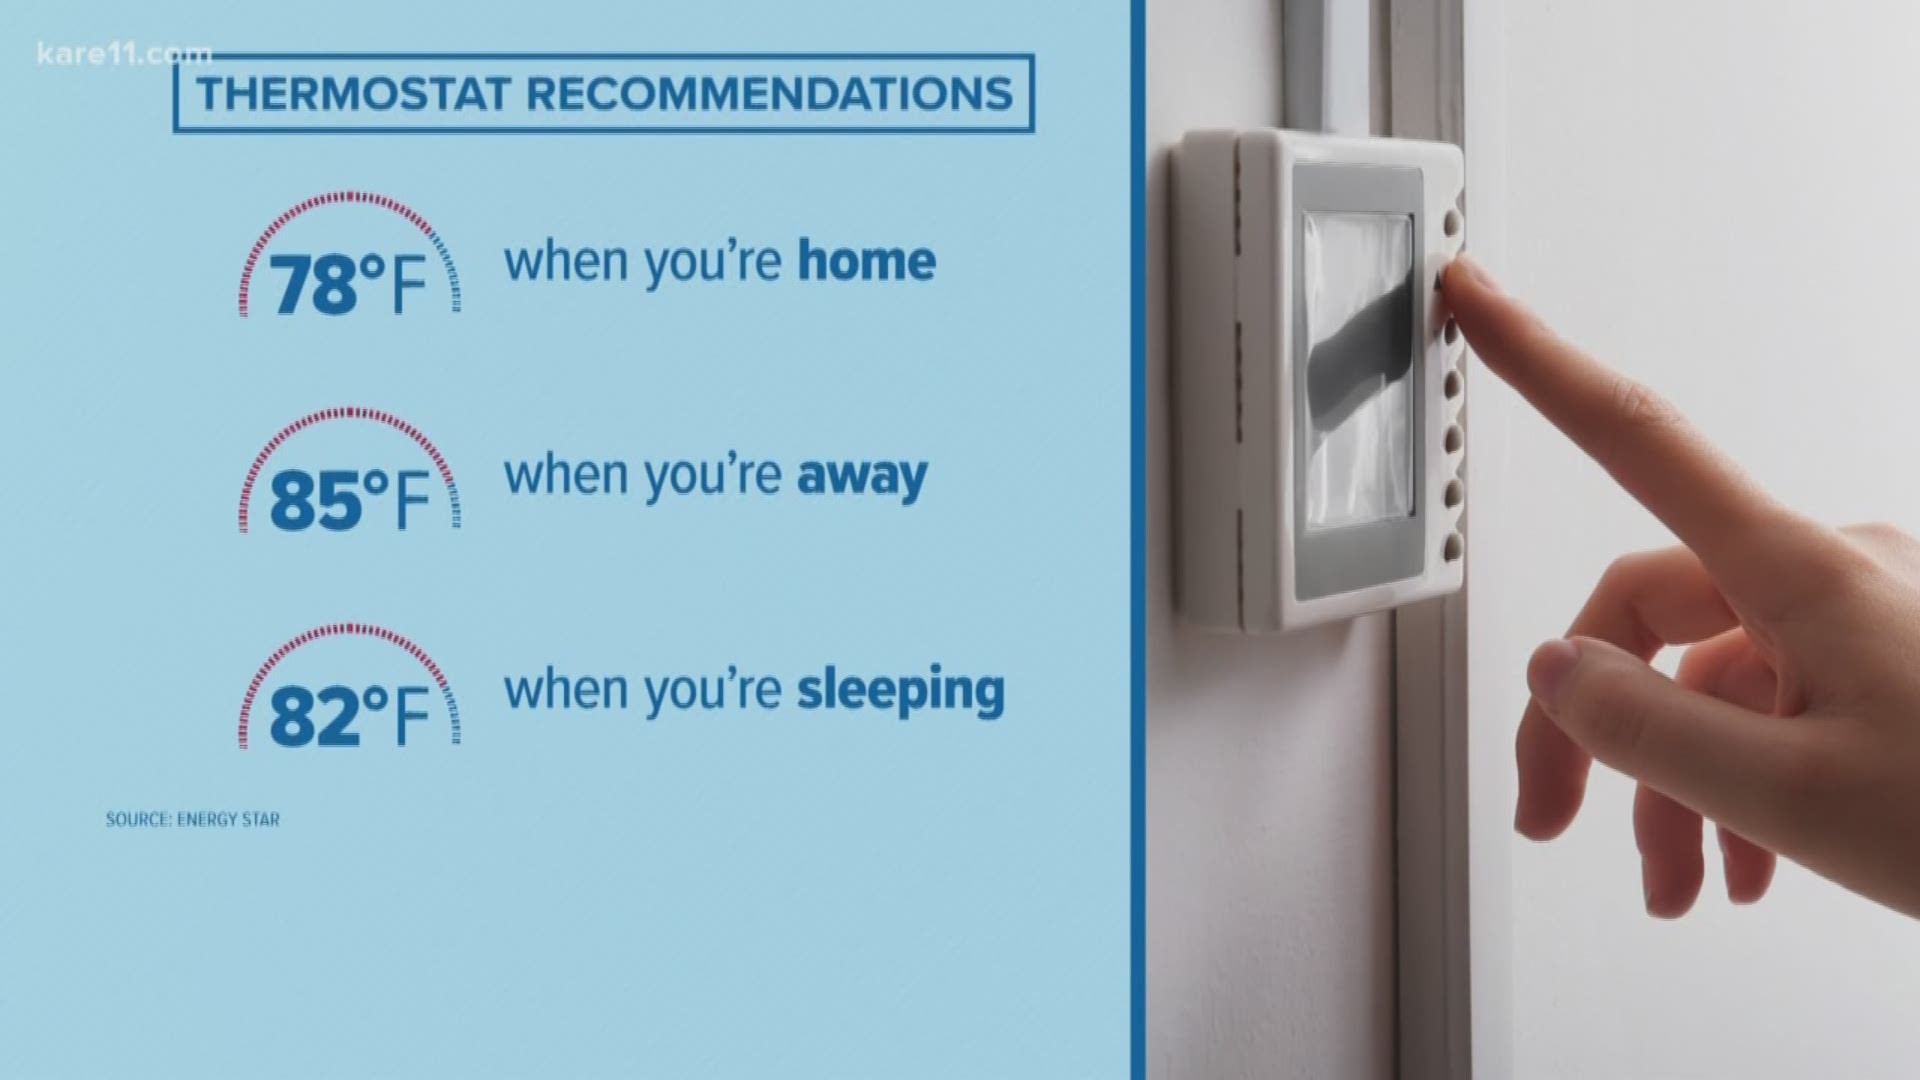 Here's a topic getting people really heated - both literally and figuratively. New recommendations say to be the most energy efficient in the summer you should set your thermostat to 78 when you're home, 82 when you're sleeping and 85 when you're away.